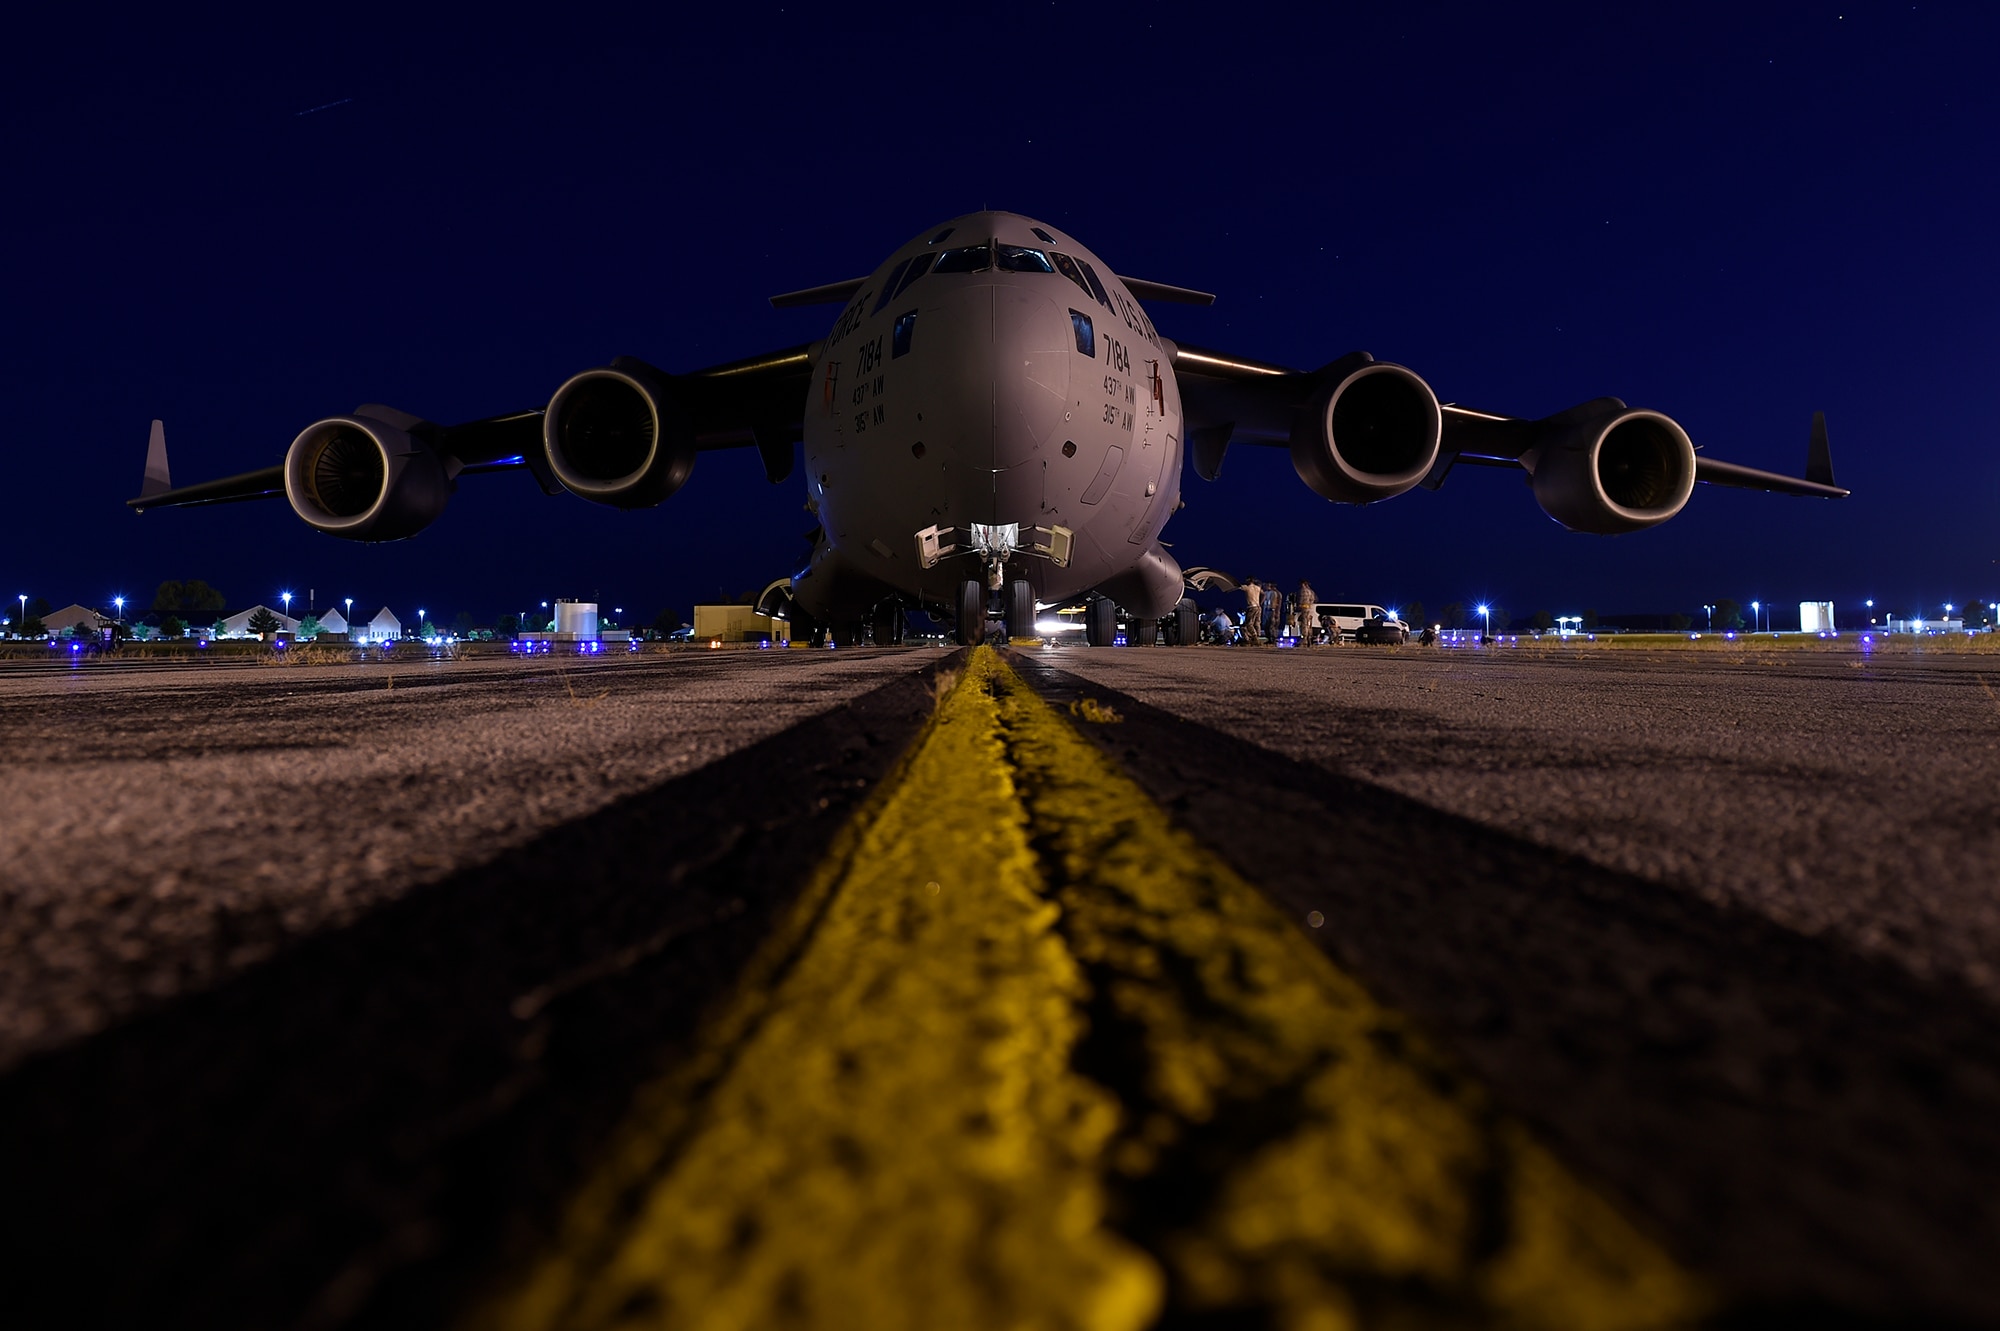 Airmen assigned to the 437th Aircraft Maintenance Squadron change a tire on a C-17 Globemaster III Sept. 13, 2018, at Scott Air Force Base, Ill. 437th AMXS maintainers serviced more than 10 aircraft that were evacuated from Joint Base Charleston, S.C., to Scott AFB ahead of Hurricane Florence. In all, more than 20 C-17s and supporting personnel were evacuated to three designated safe locations, enabling them to continue their global airlift operations.